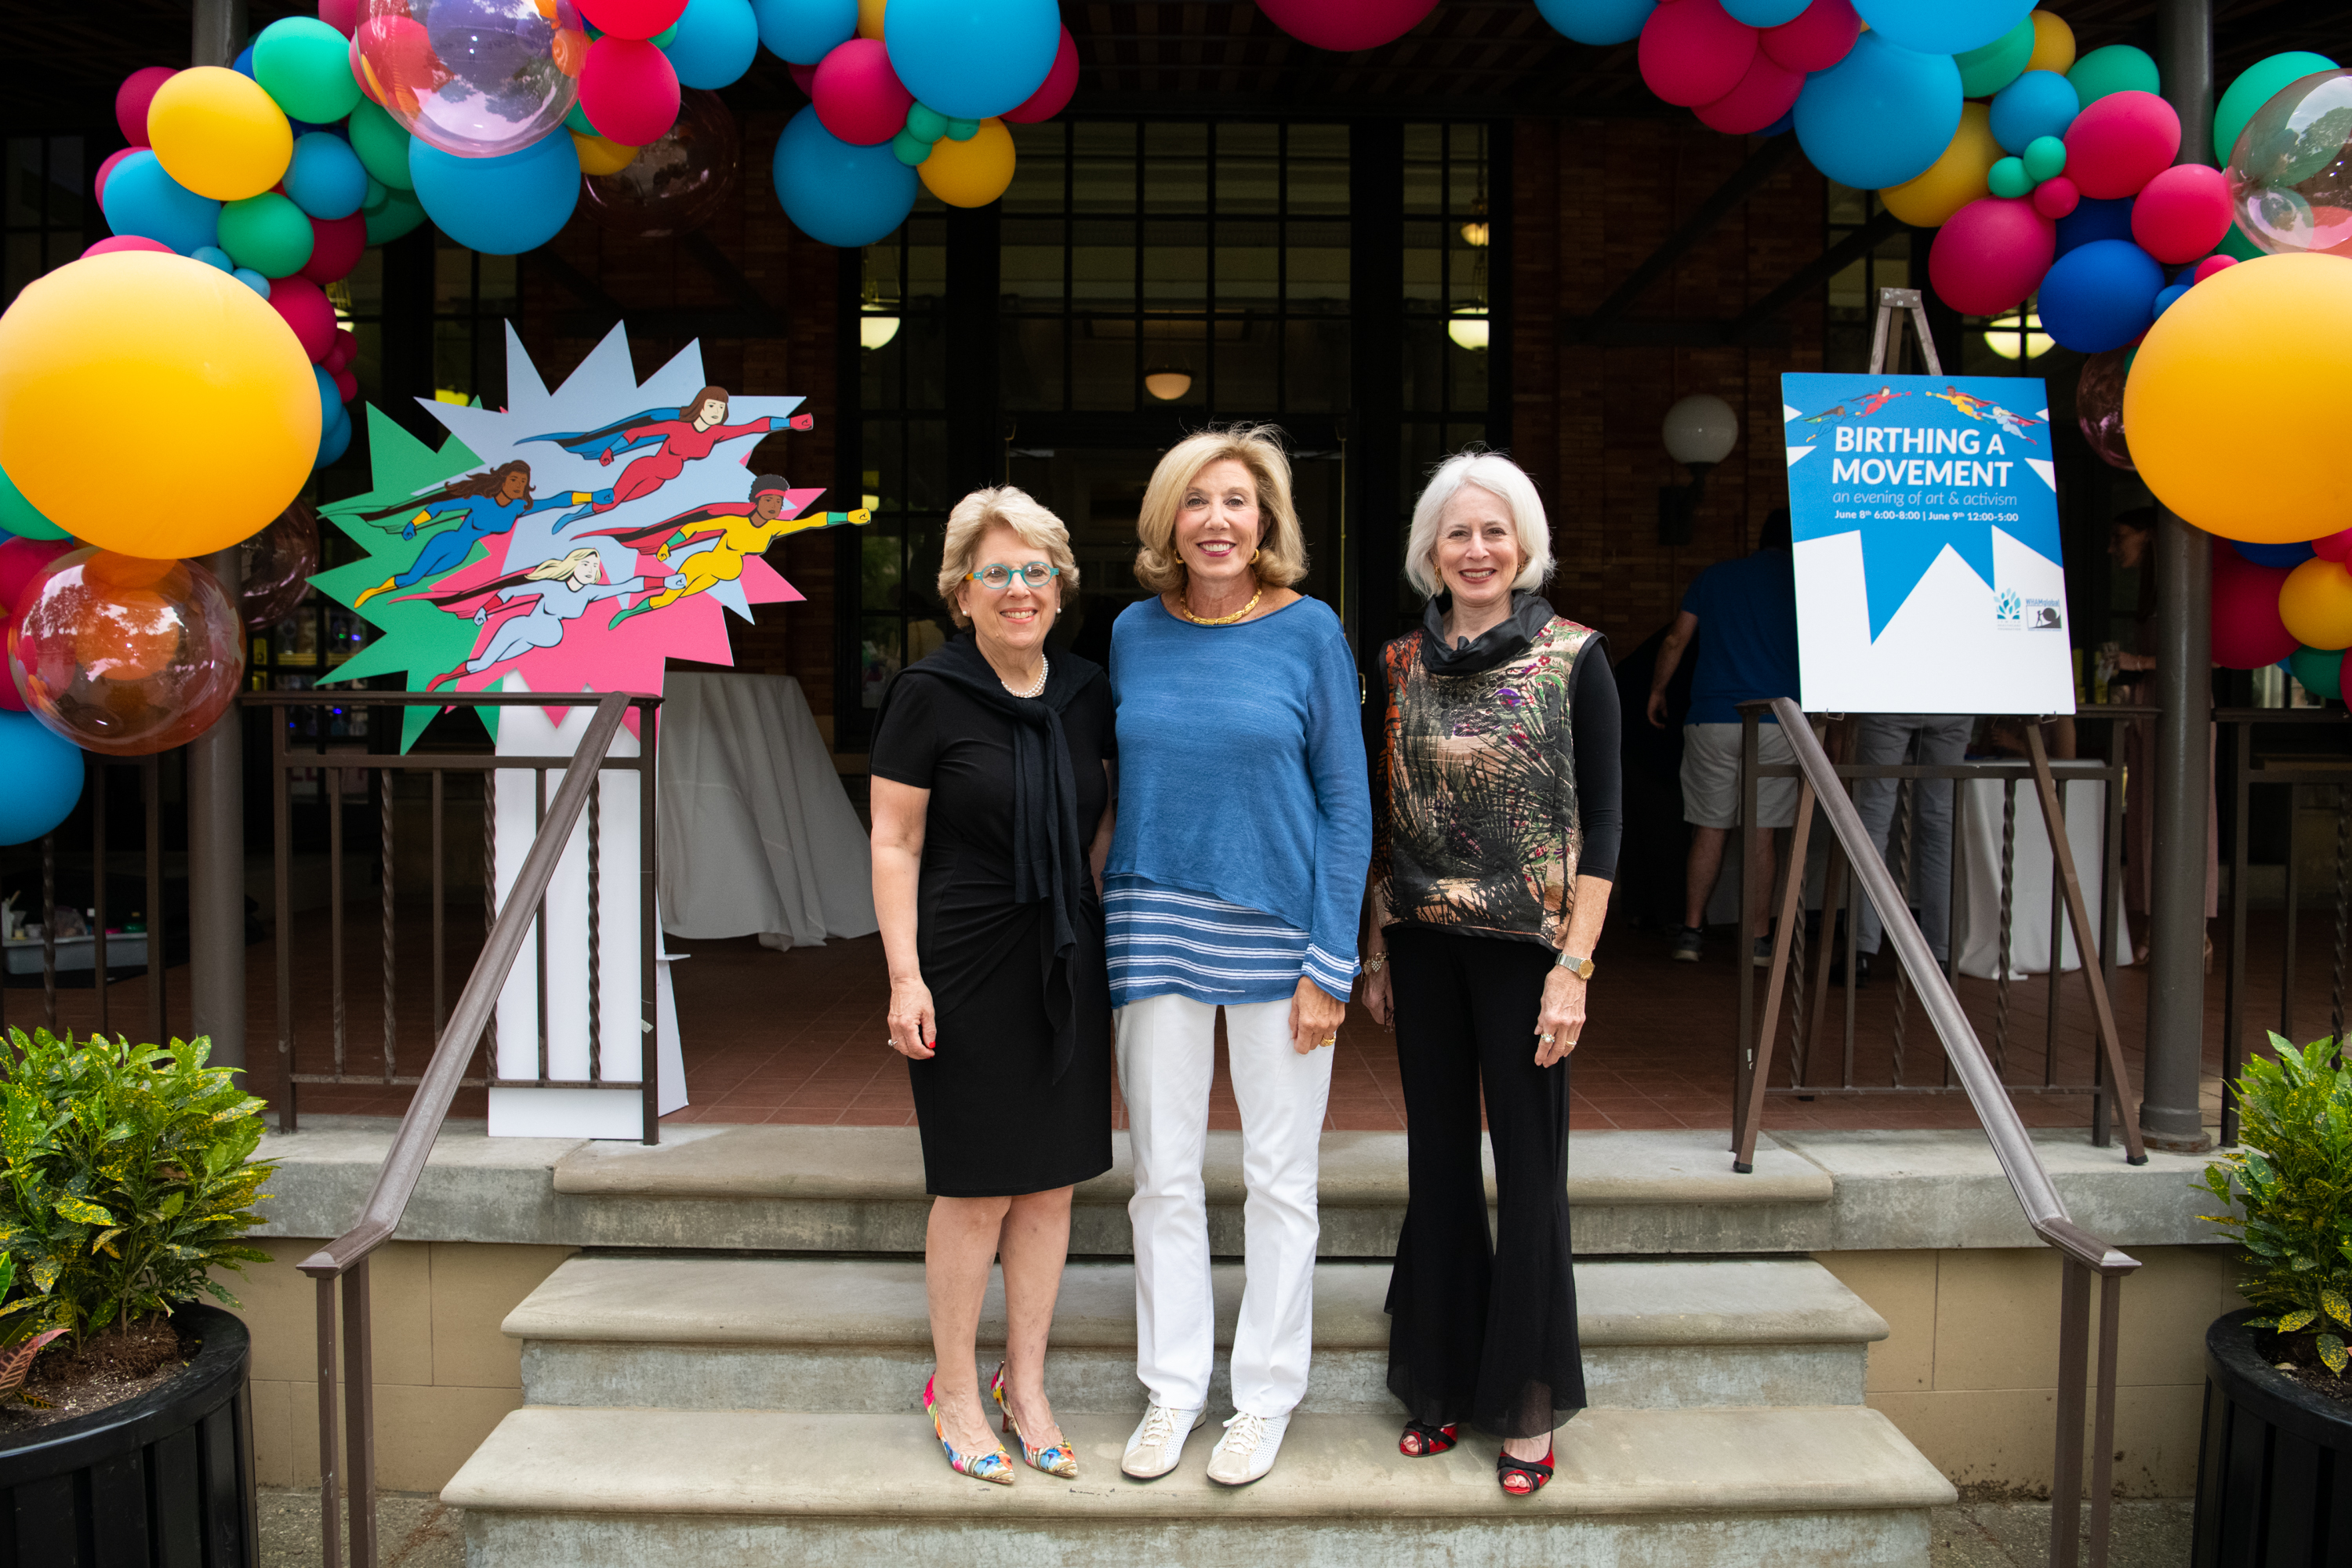 Debra L. Caplan, MPA; Patricia L. Siger; and
Karen Wolk Feinstein, PhD out front of Birthing A
Movement on Saturday, June 8.